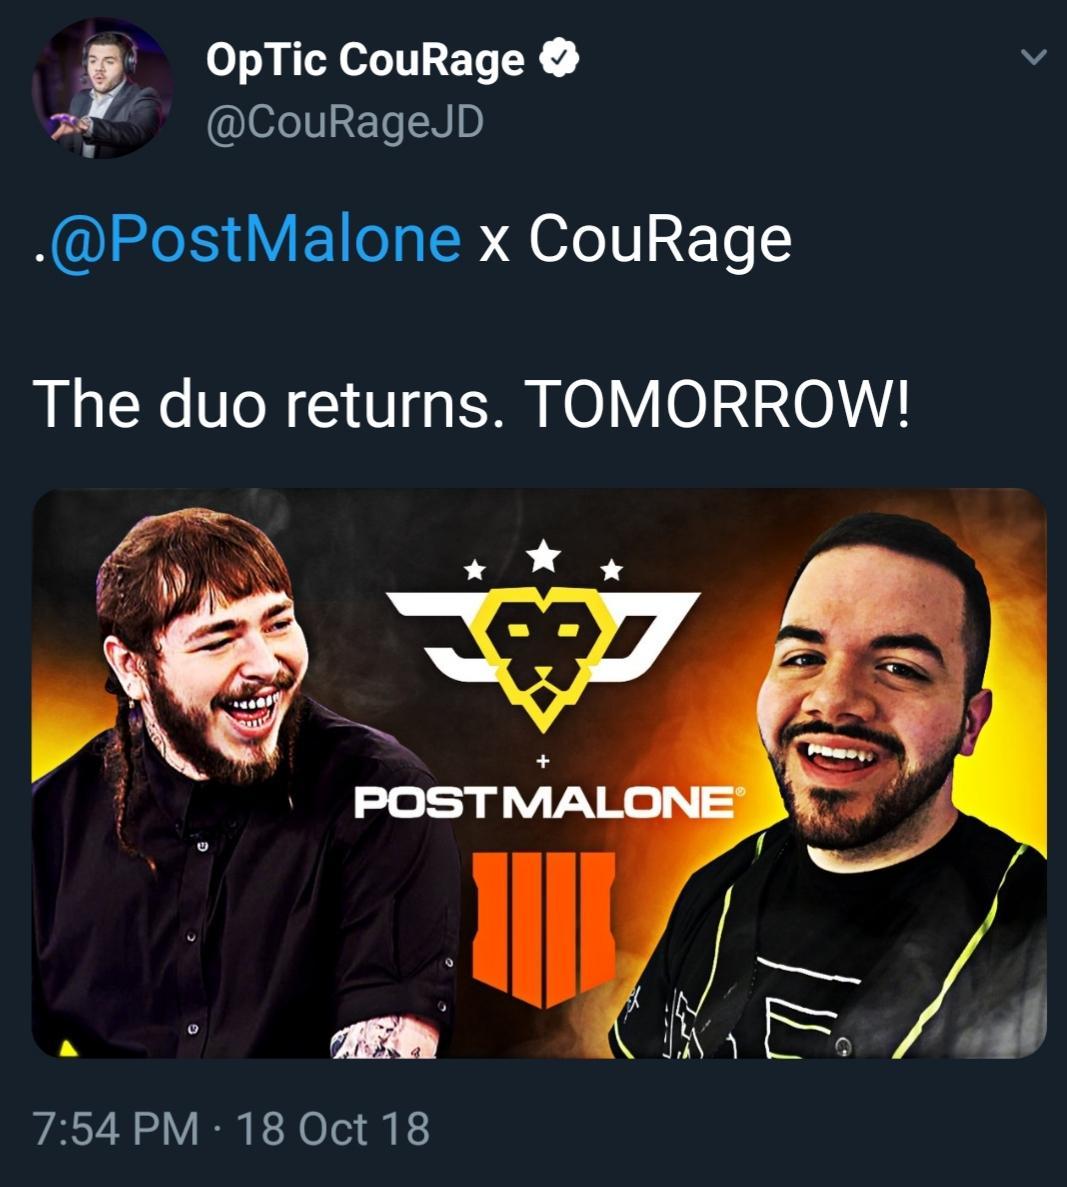 Couage Optic Logo - Post Malone will be playing duos on Black Ops 4 Blackout with Optic